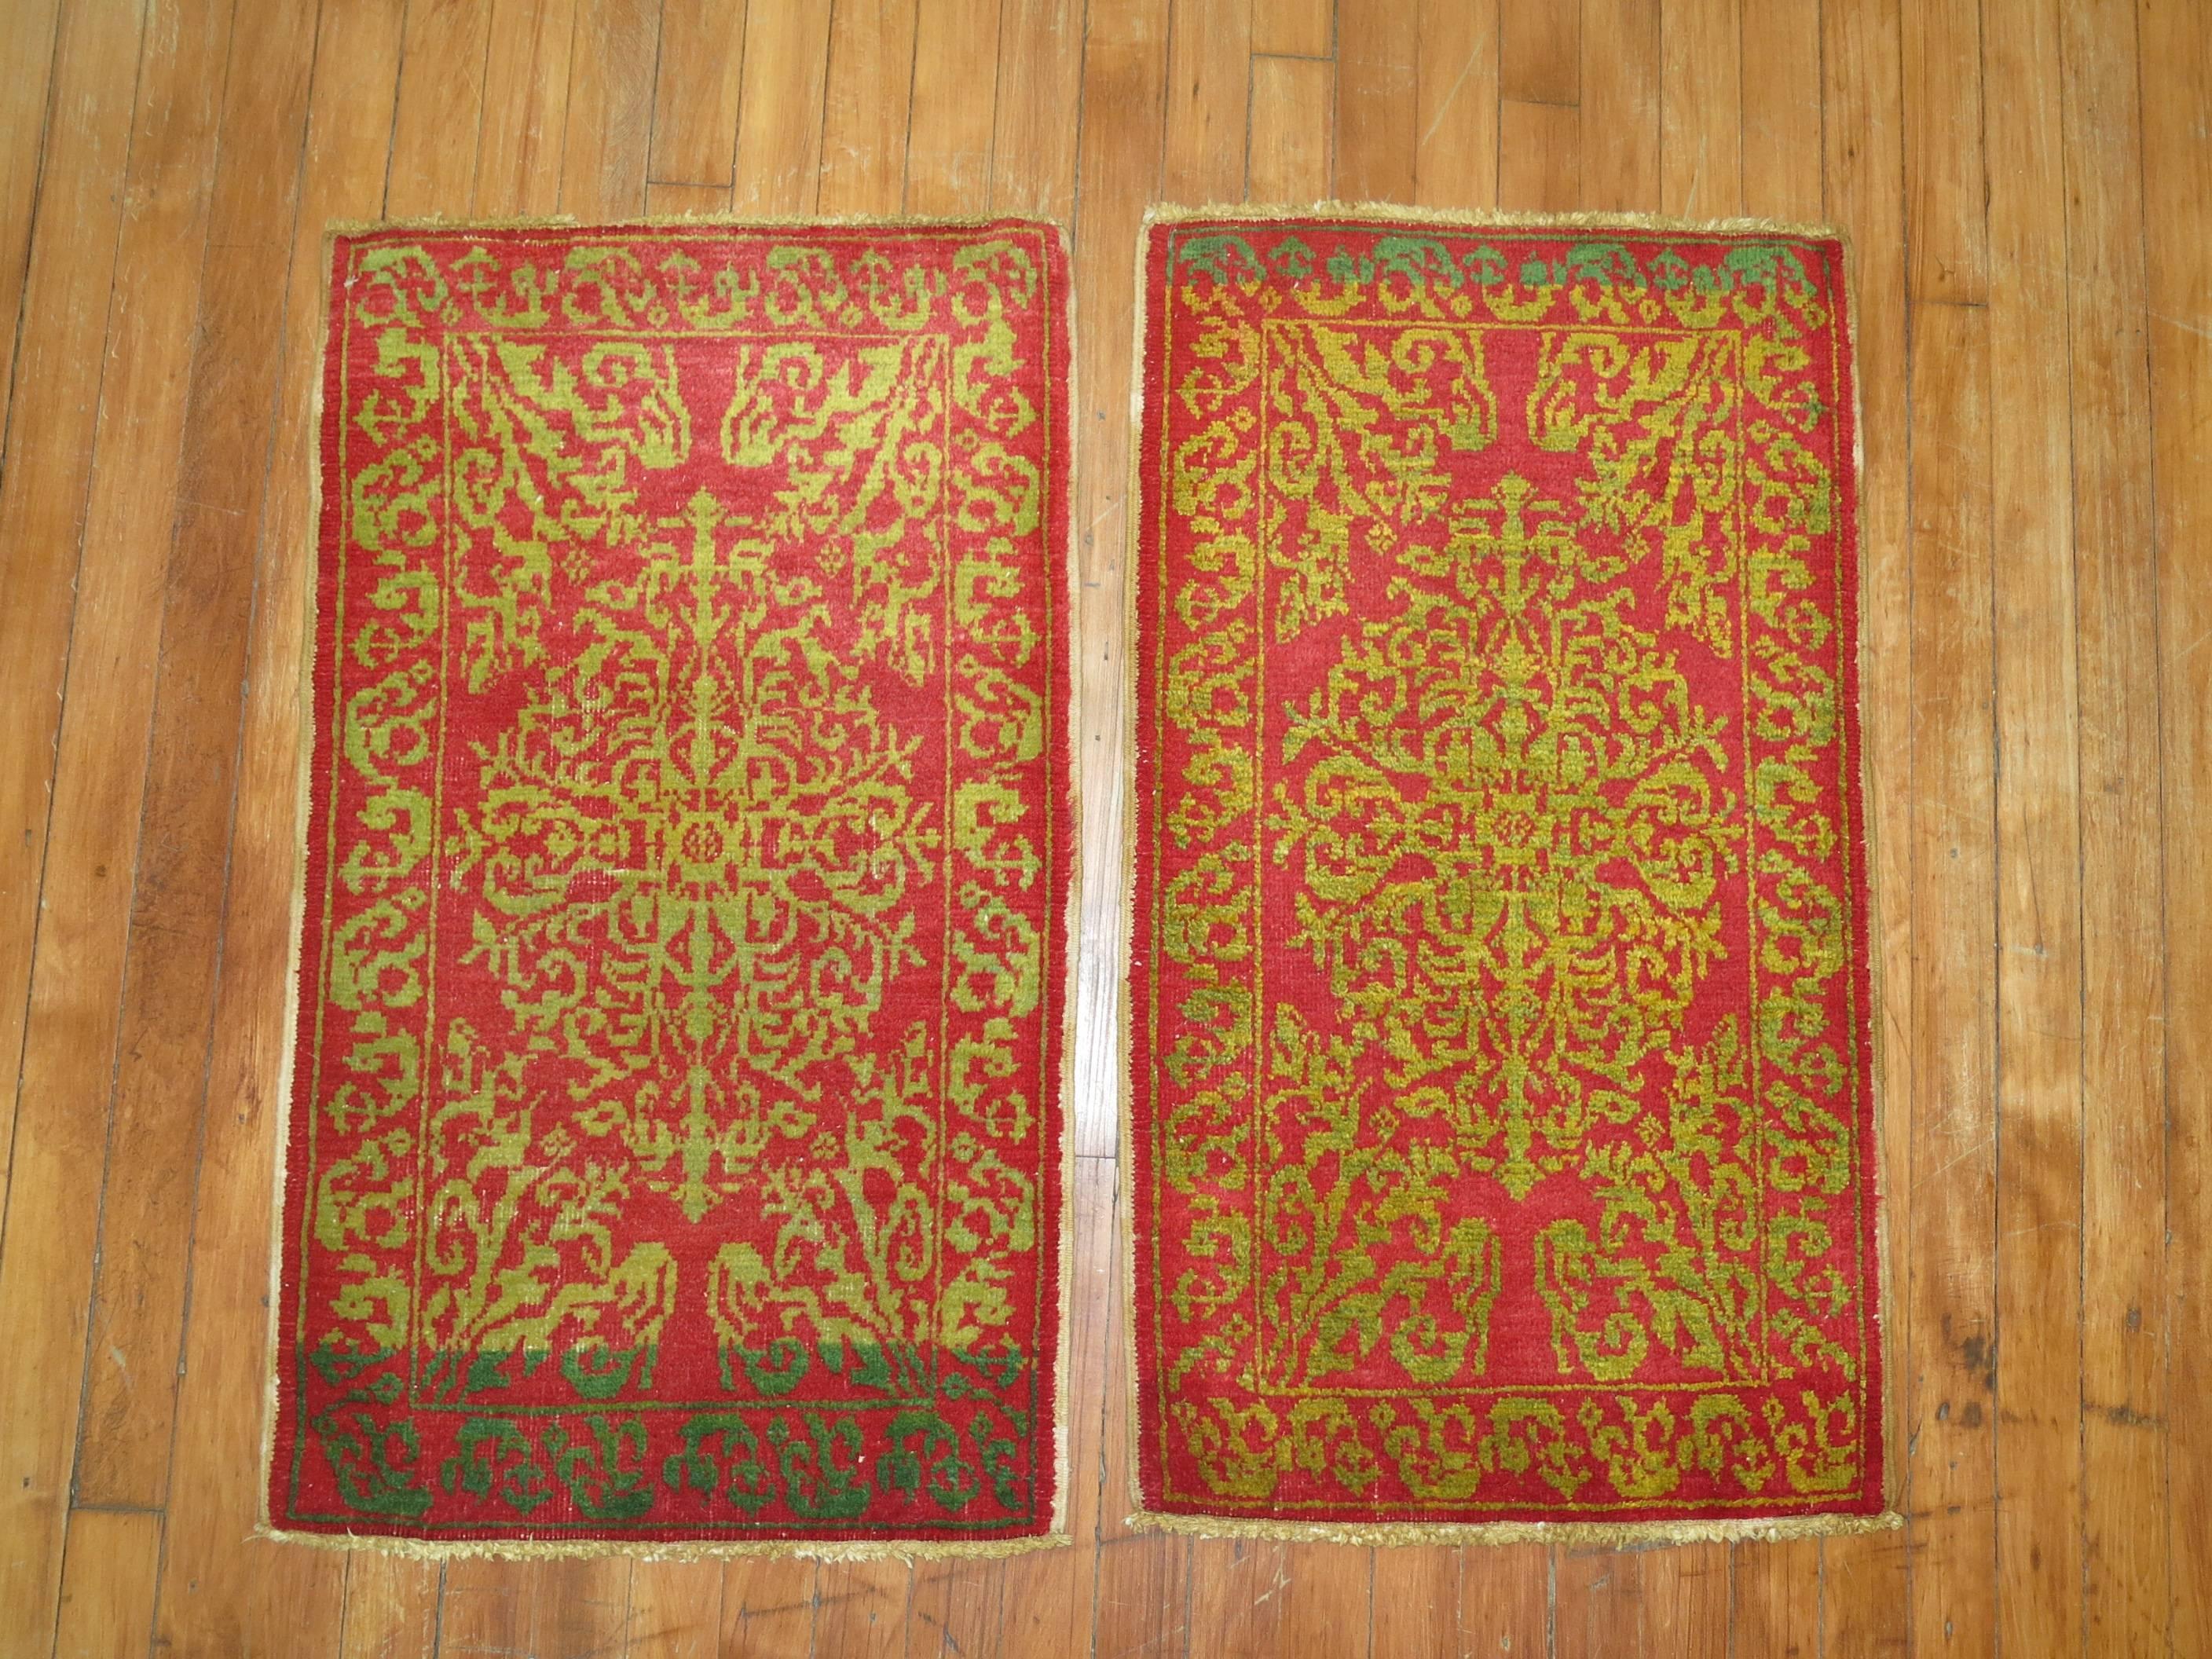 A set of finely woven Turkish rugs in bright reds and greens.